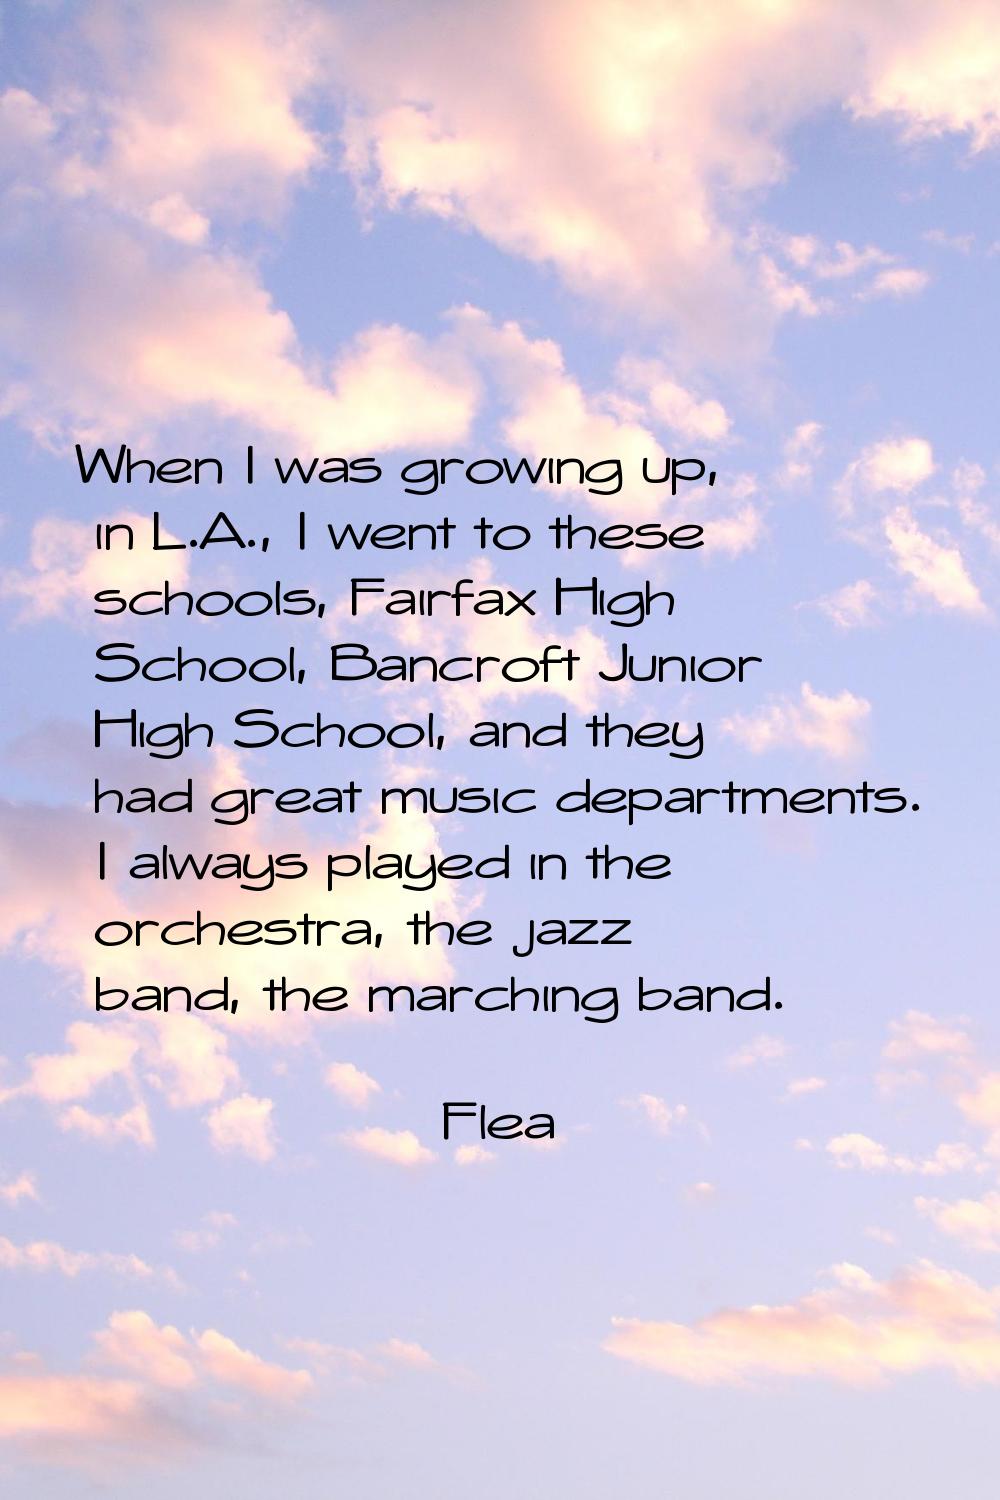 When I was growing up, in L.A., I went to these schools, Fairfax High School, Bancroft Junior High 